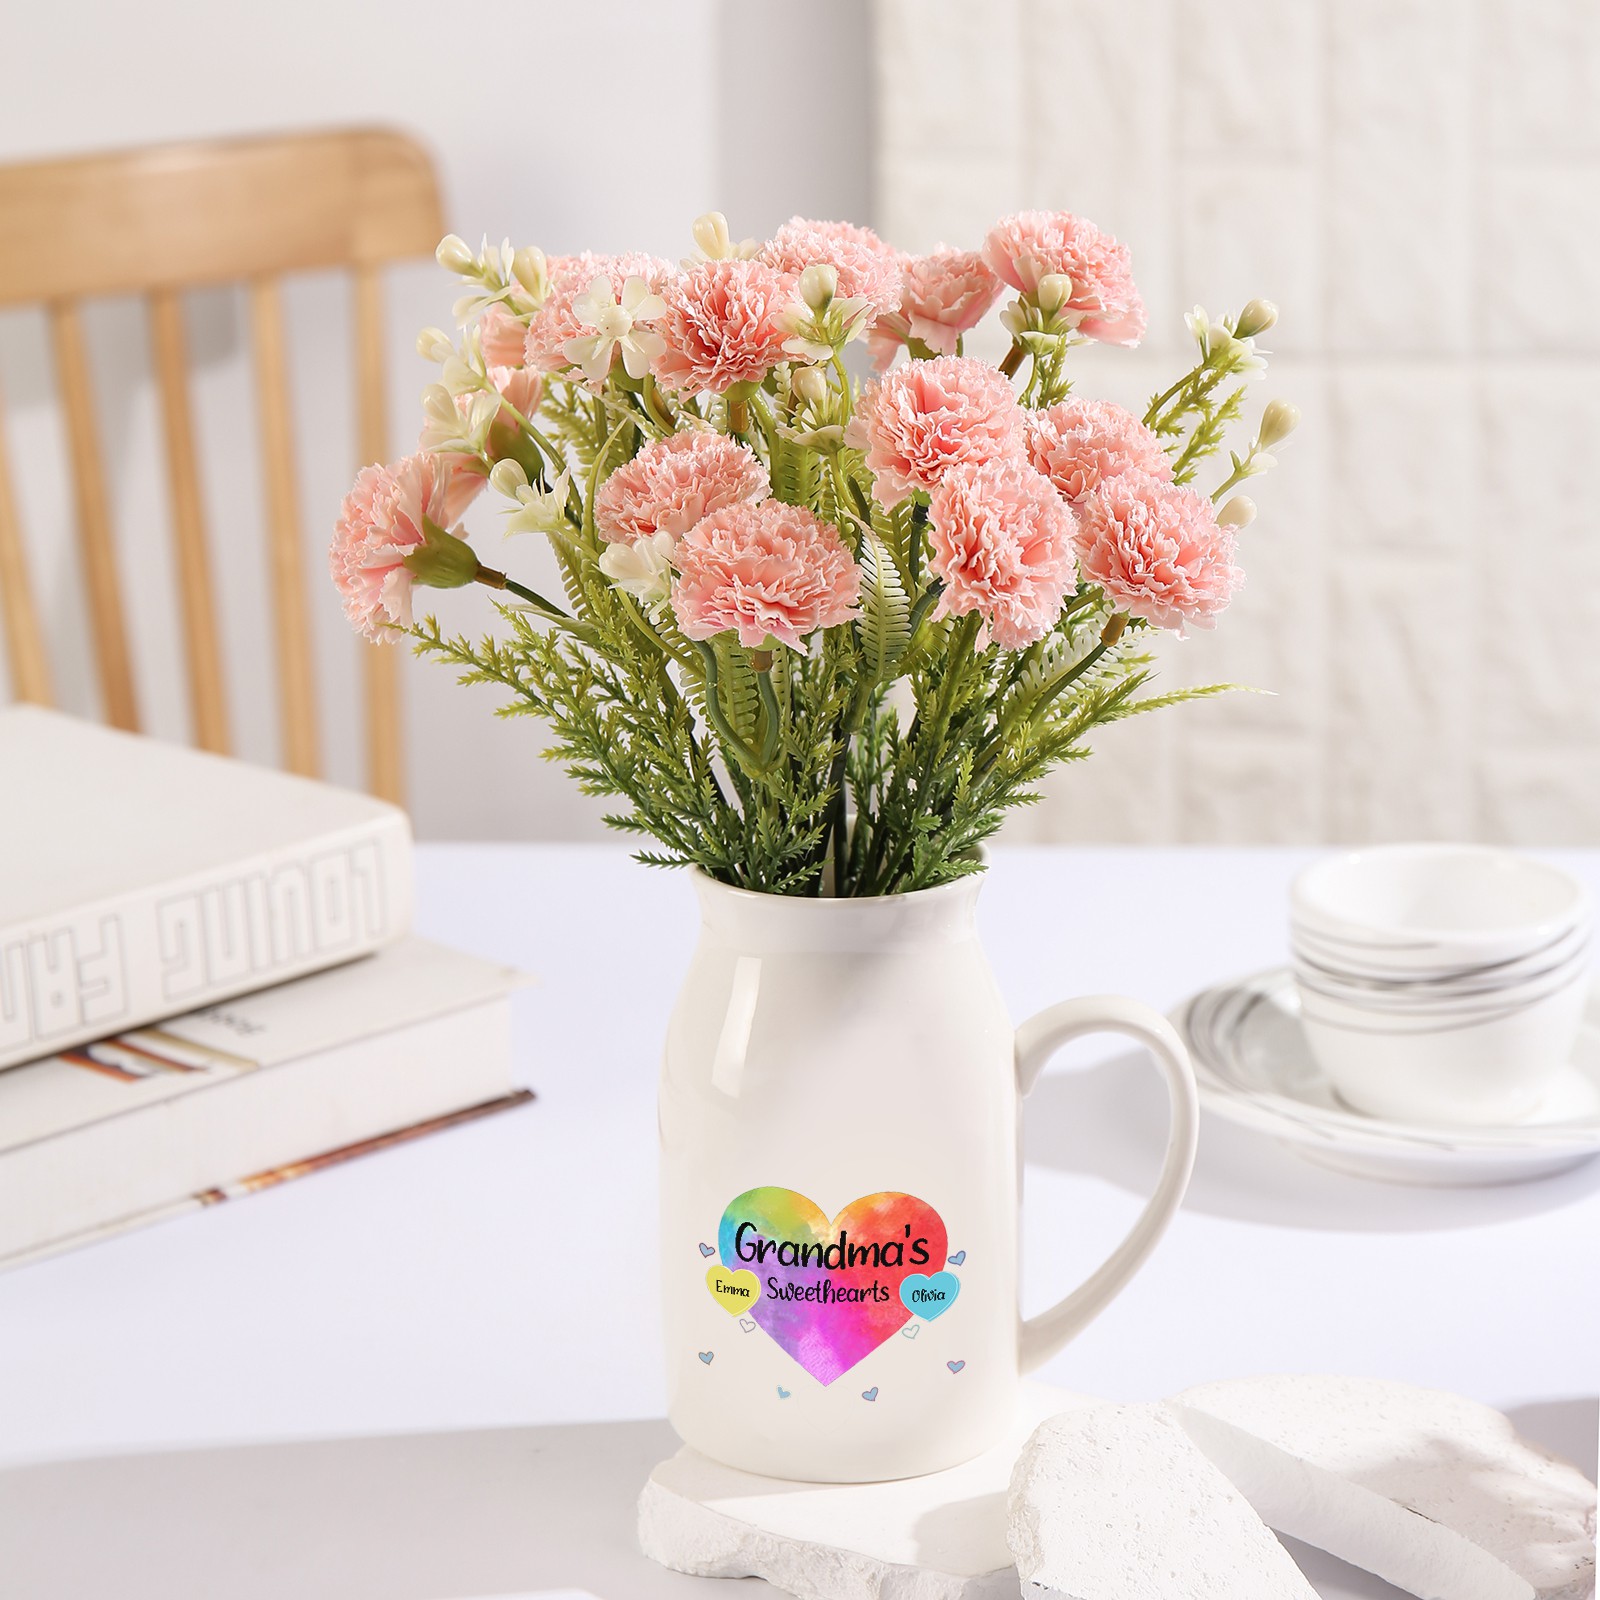 2 Names - Personalized Customizable Name Colorful Love Heart Style Ceramic Vase as a Gift for Grandma